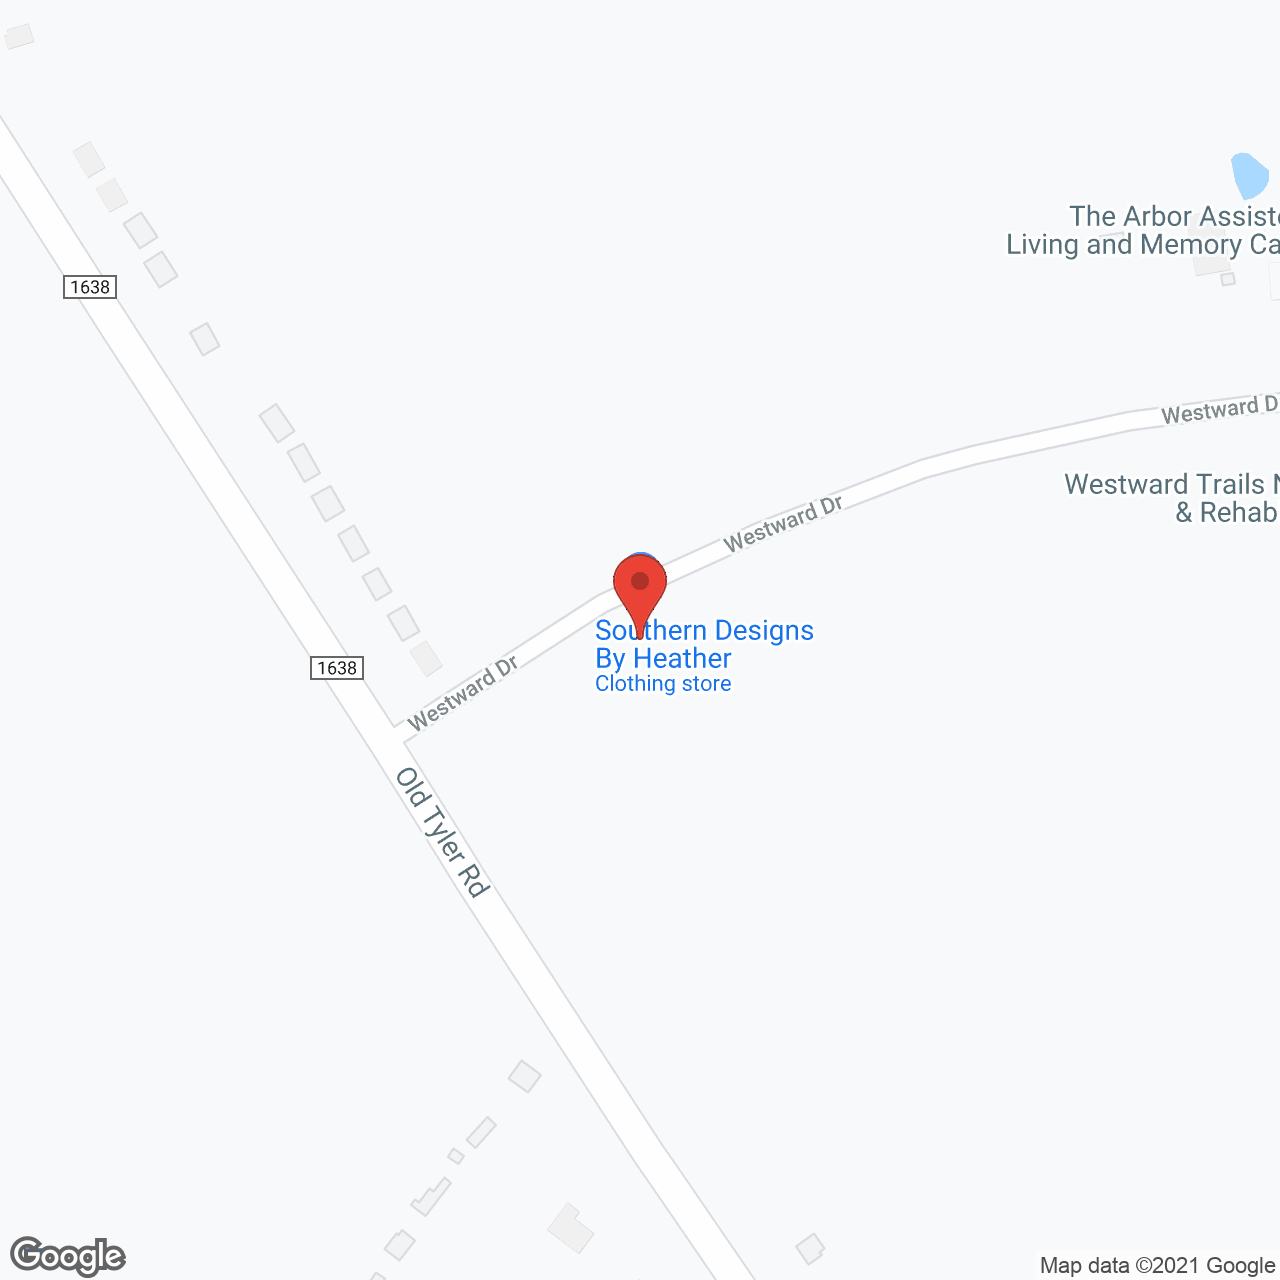 The Arbor Assisted Living & Memory Care in google map